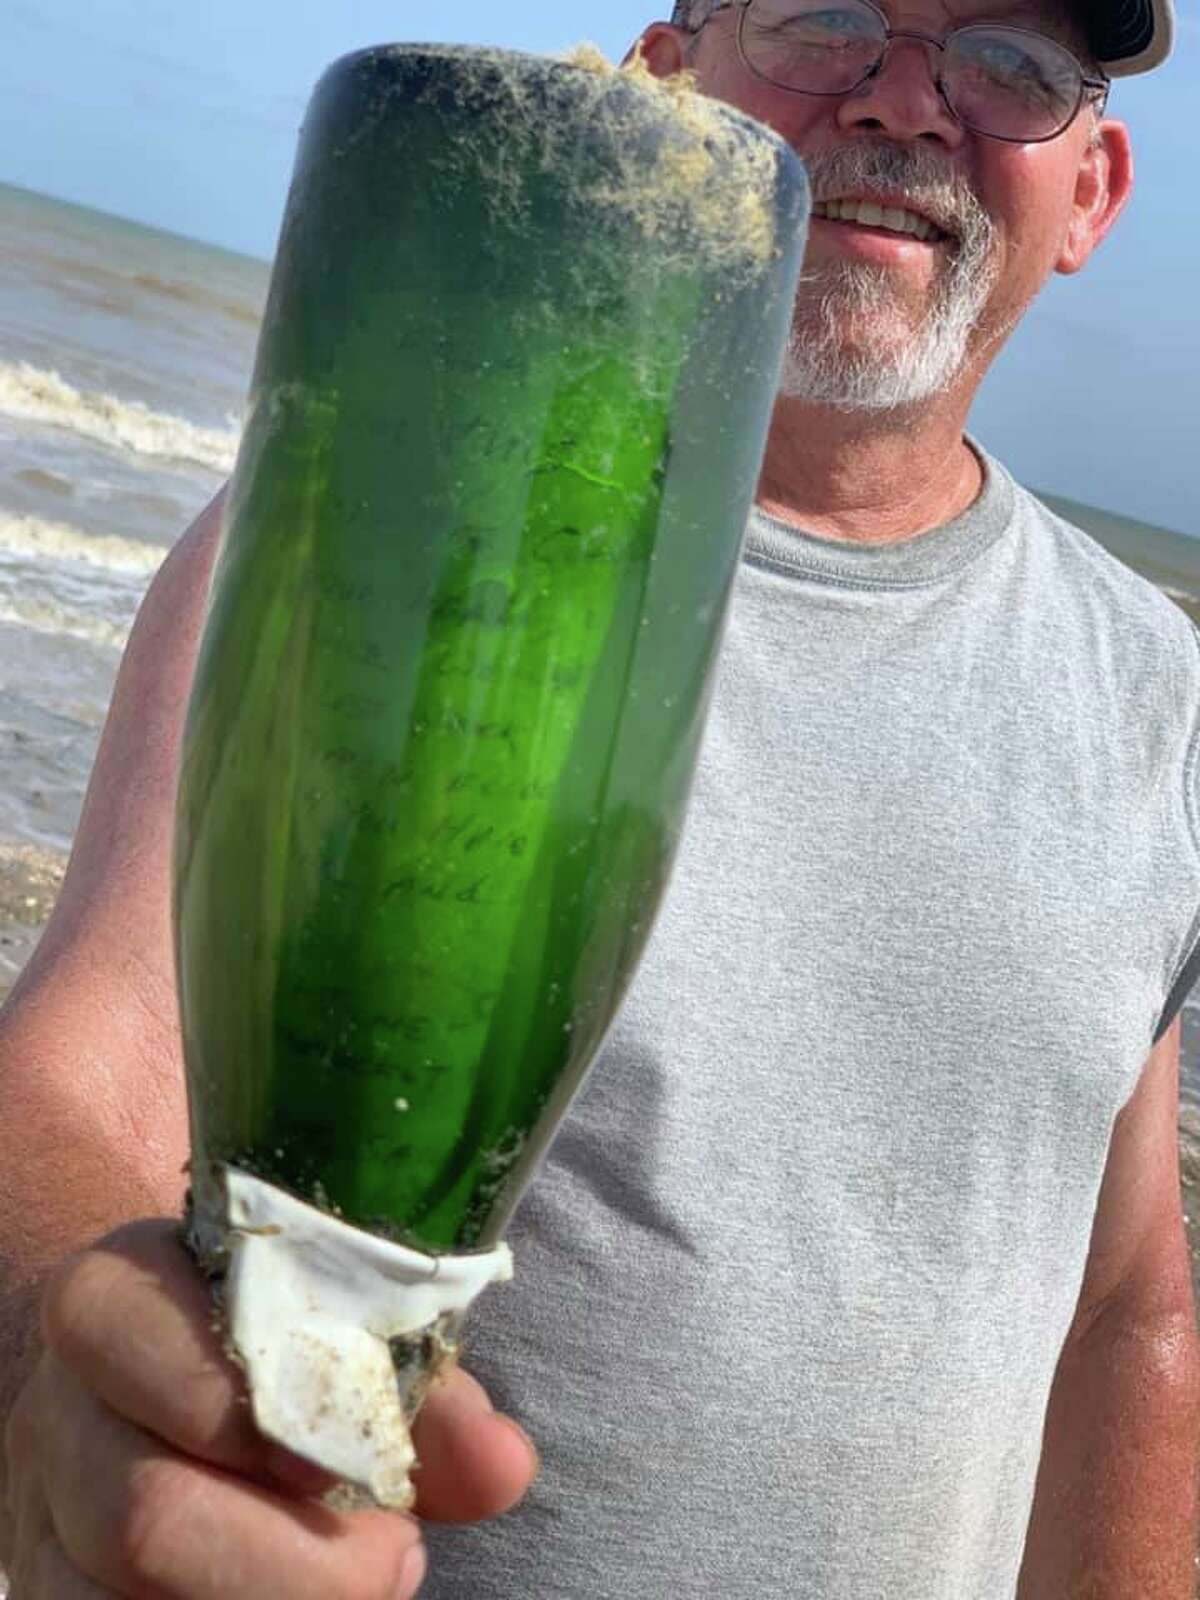 James Howie Hill says on Friday, the group had been combing for several hours. That's when he spotted a green object that caught his eye. "I saw the bottle and it looked like it had something in it," said Hill. "After wiping the dried algae off I saw the note and handwriting. We were all excited."